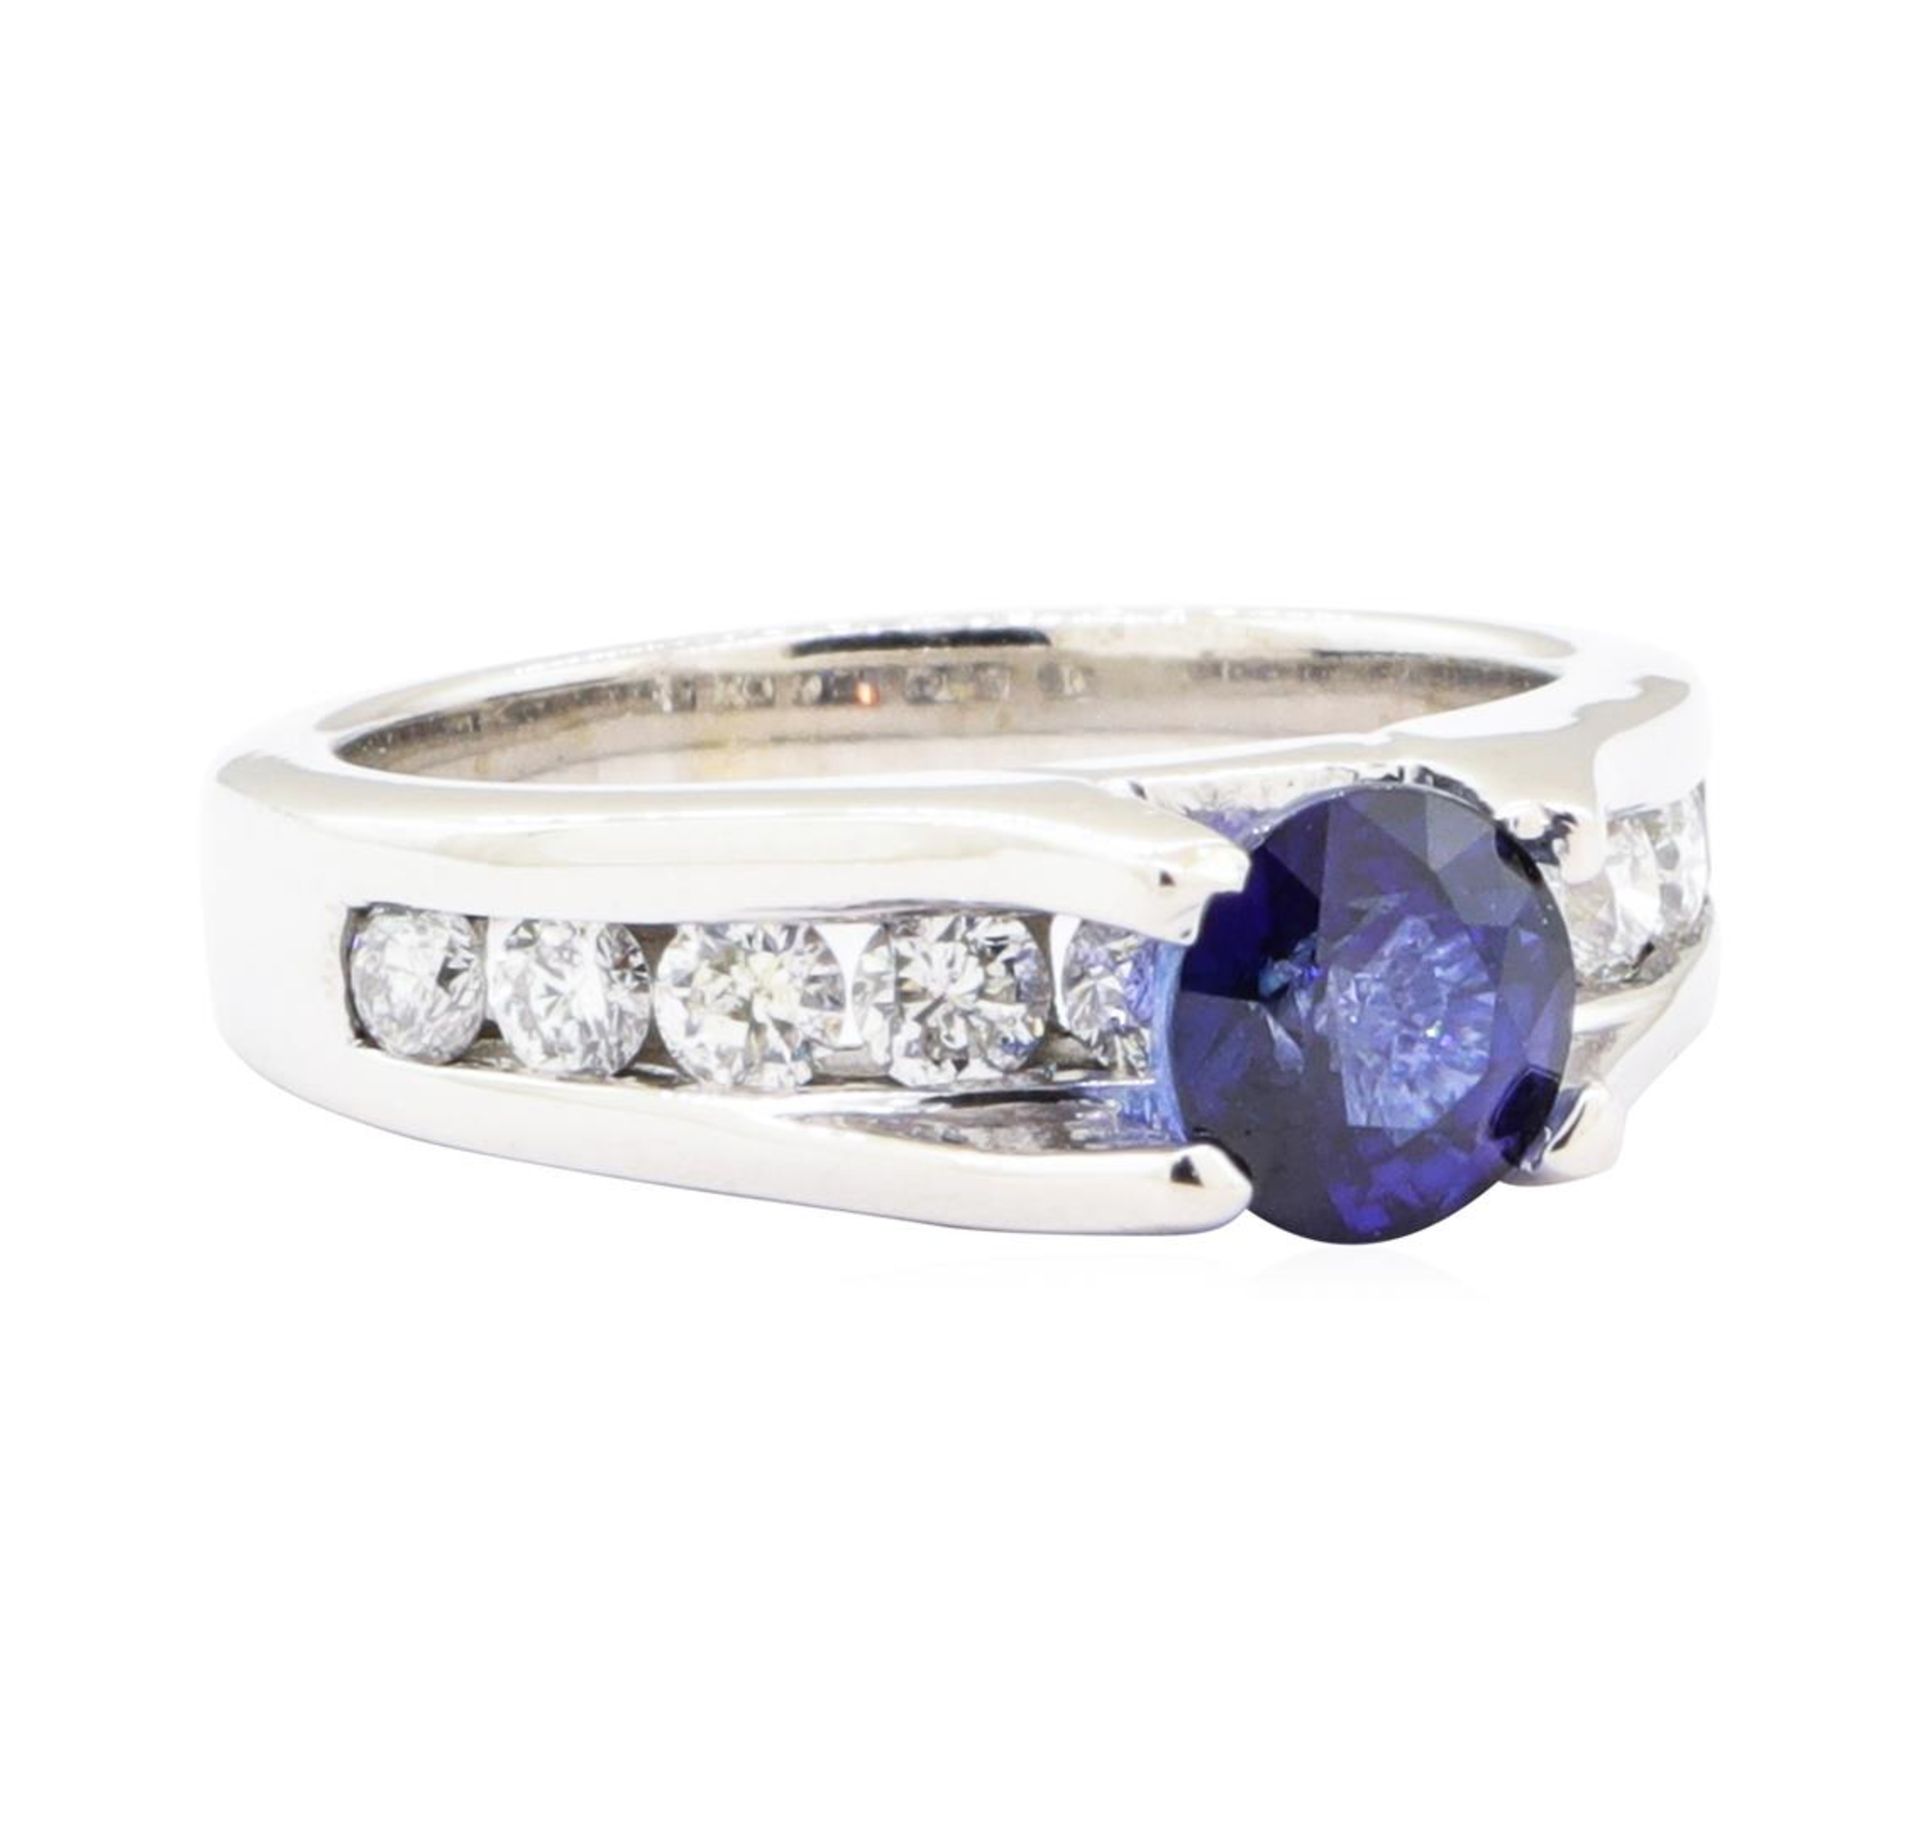 2.05ctw Sapphire and Diamond Ring - 14KT White Gold